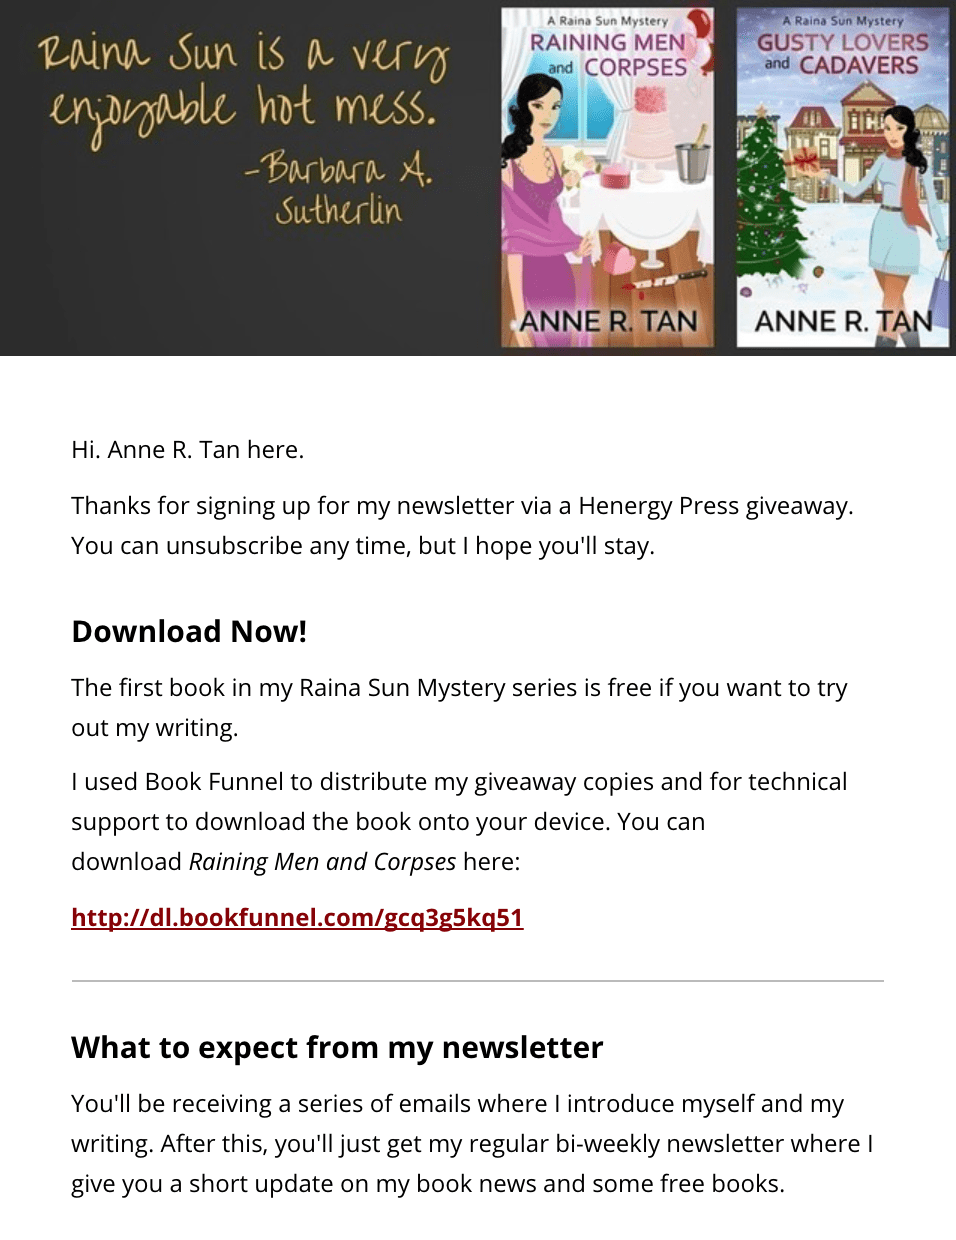 Anne R. Tan Email Newsletter Example